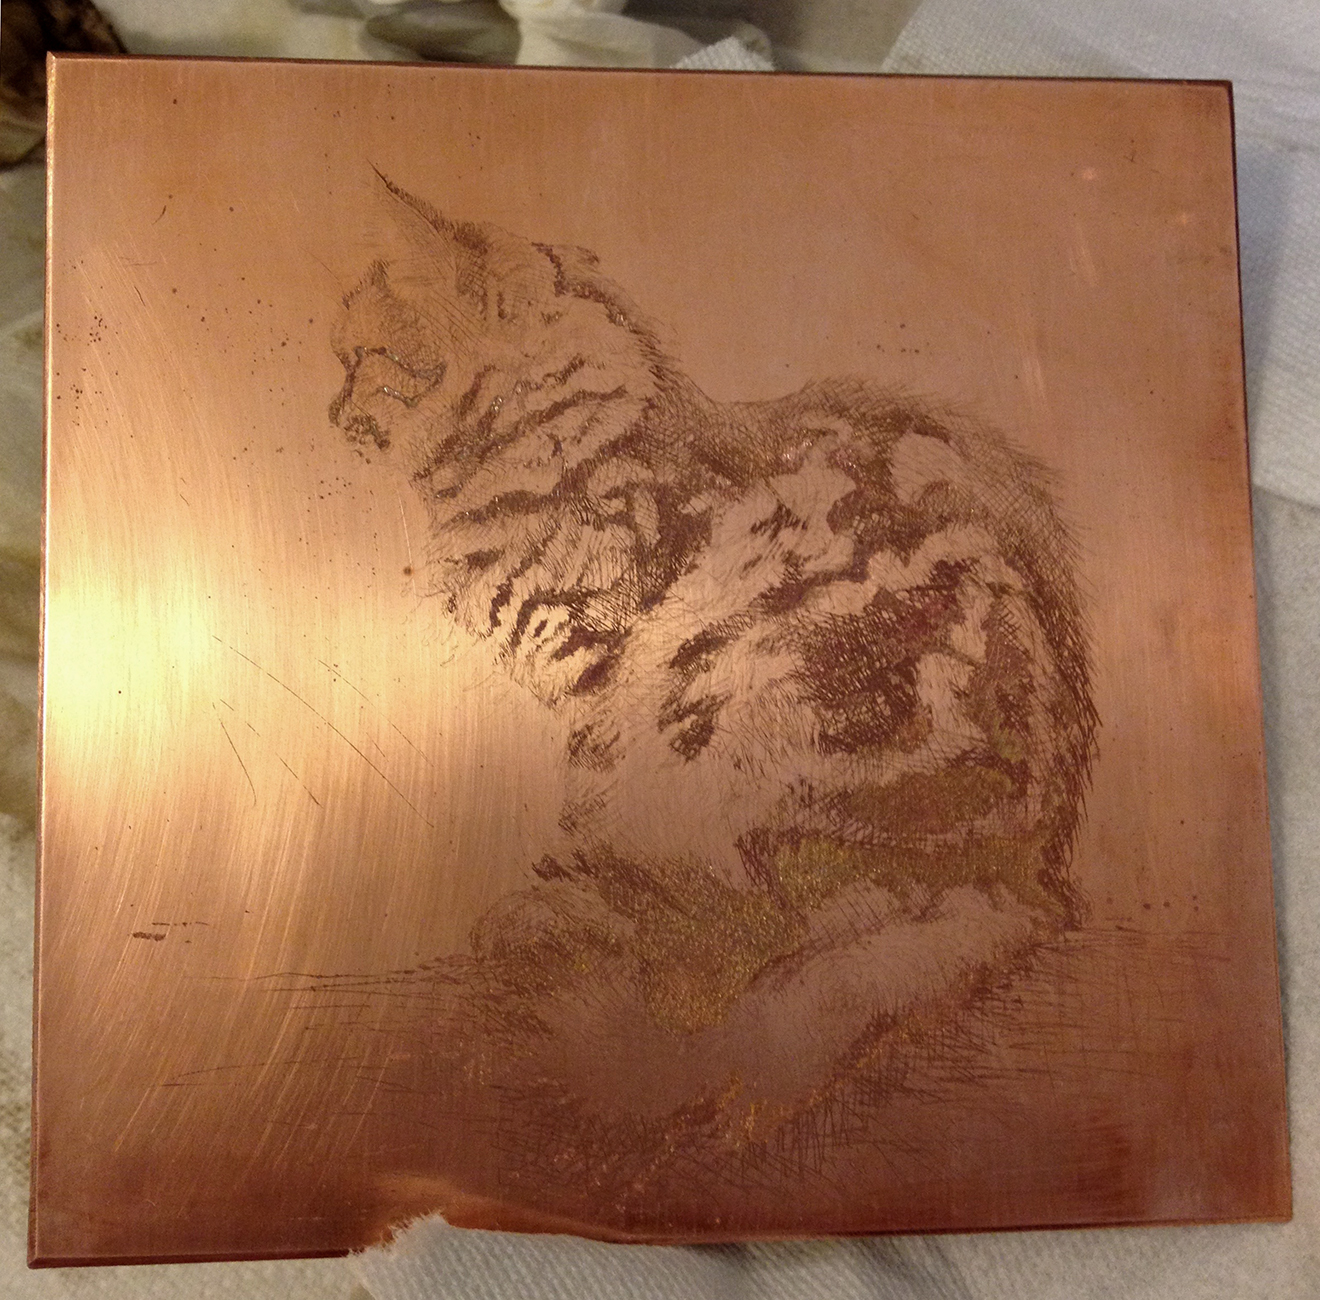 How to Paint on Copper  Preparing Copper Plate by Candice Bohannon